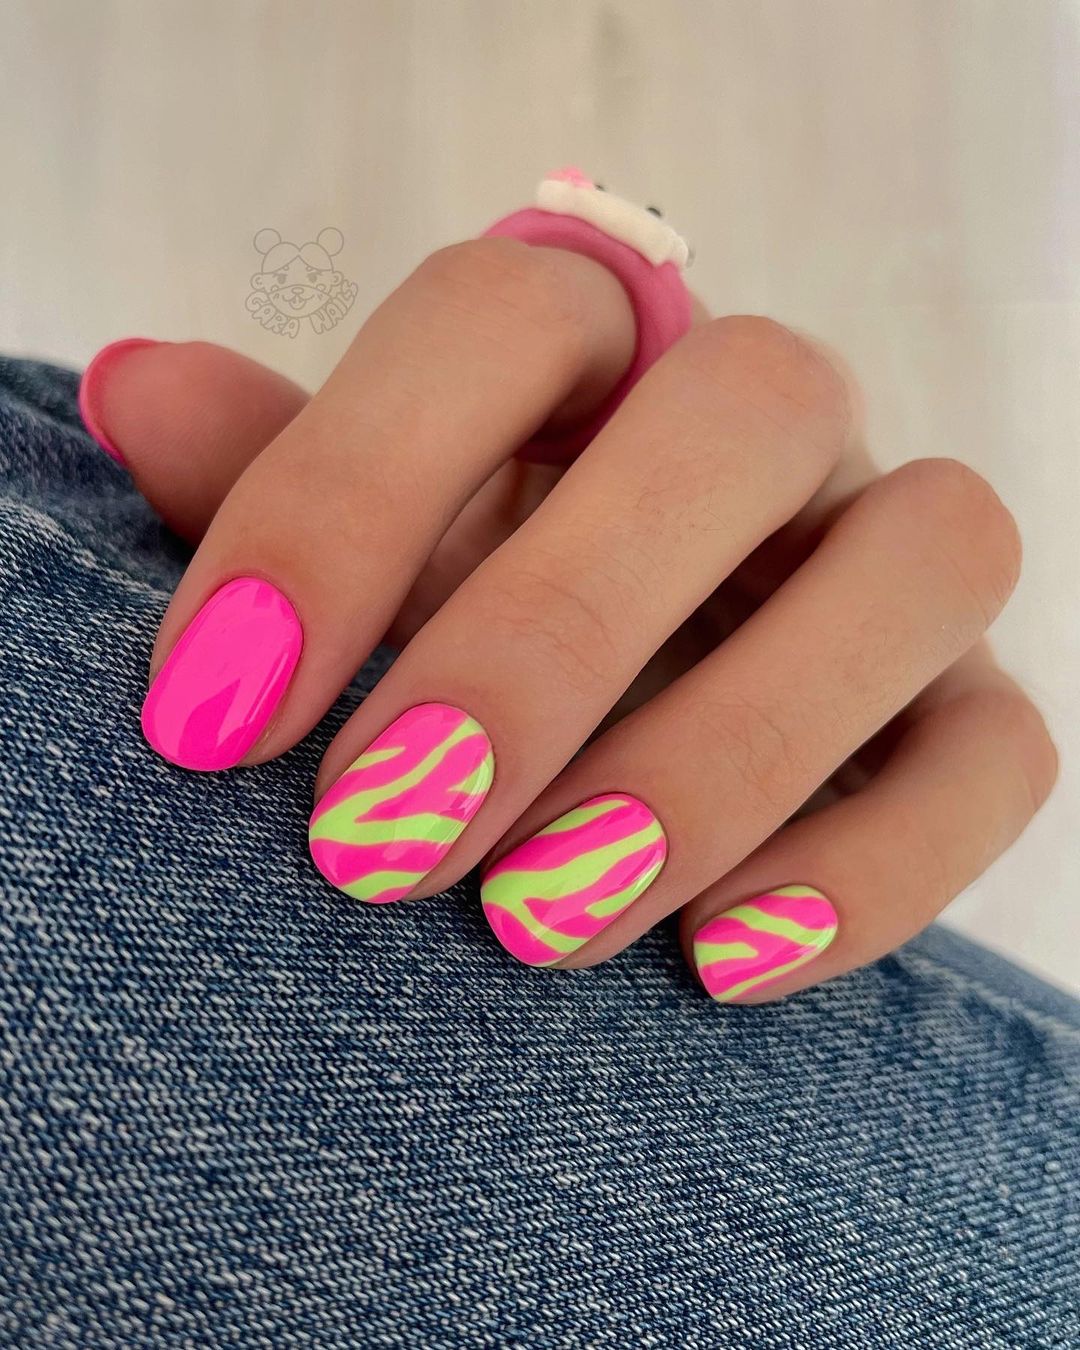 Gorgeous Acrylic Light Pink Nails Designs  Nail Designs Journal